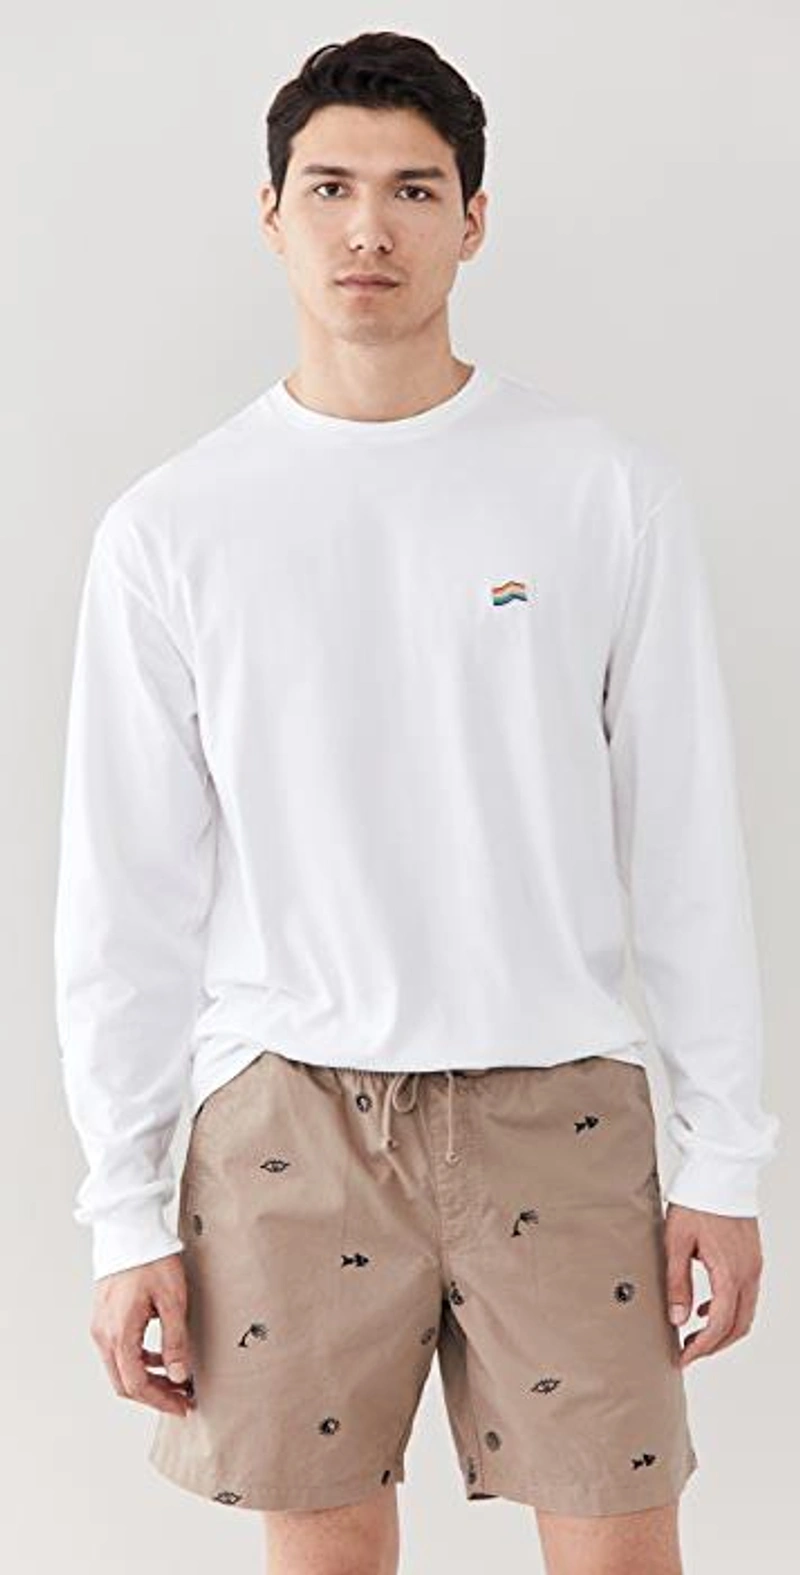 shopbop.com's Posts | 搭配: Vans Pride Collection Tee In White；Vans Shorts 18" In Jank Ditsy